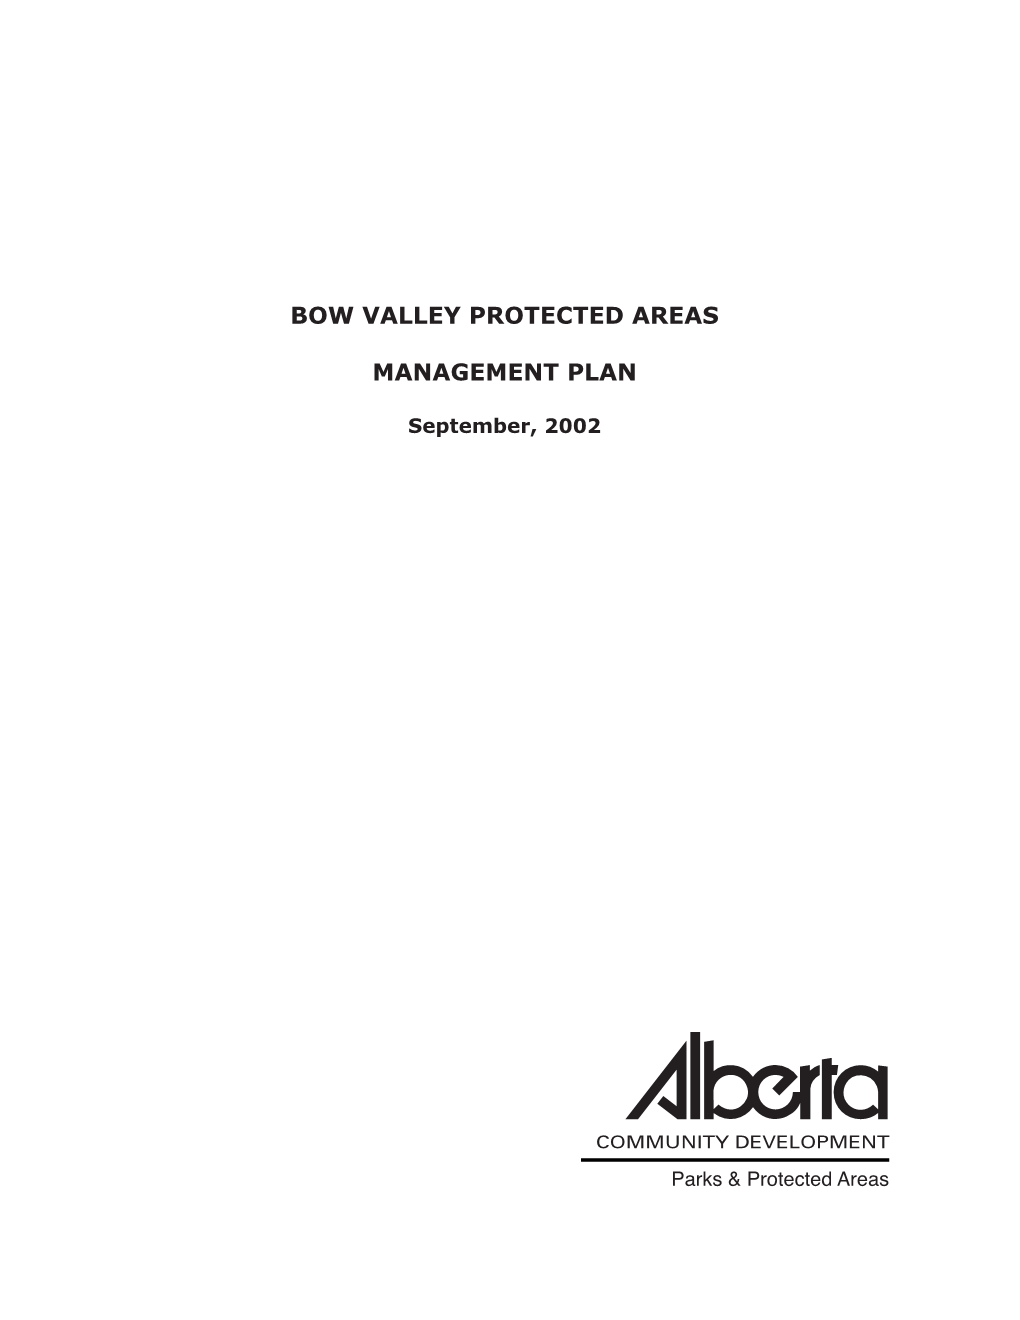 Bow Valley Protected Areas Management Plan Provides a Long-Term Vision and Day-To-Day Guidance for Stewardship of These Protected Areas